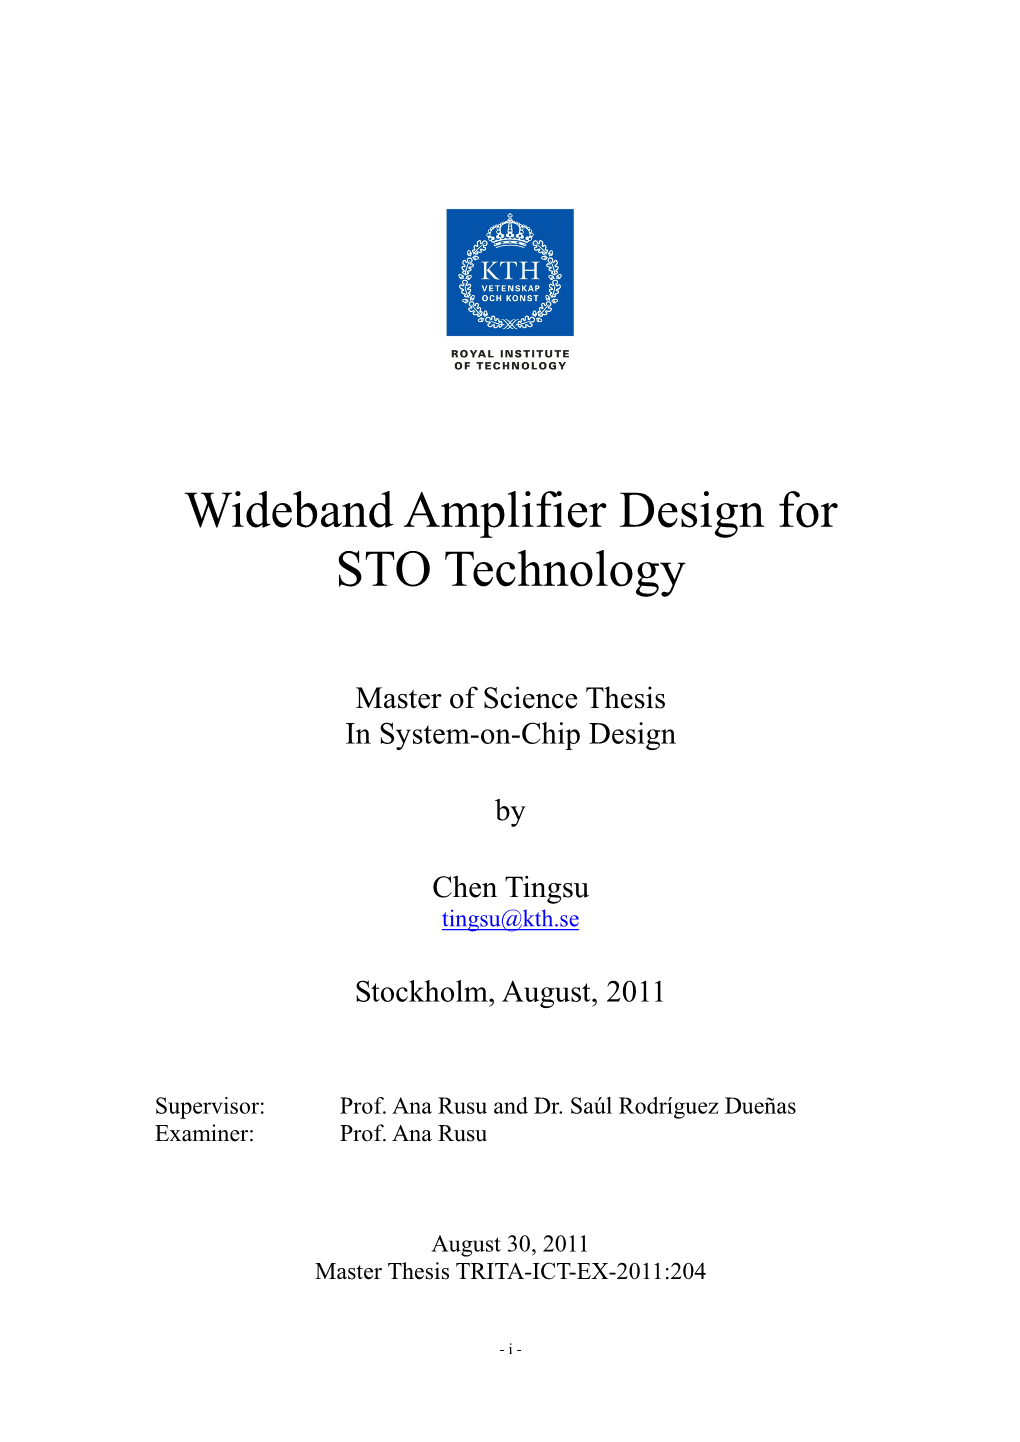 Wideband Amplifier Design for STO Technology